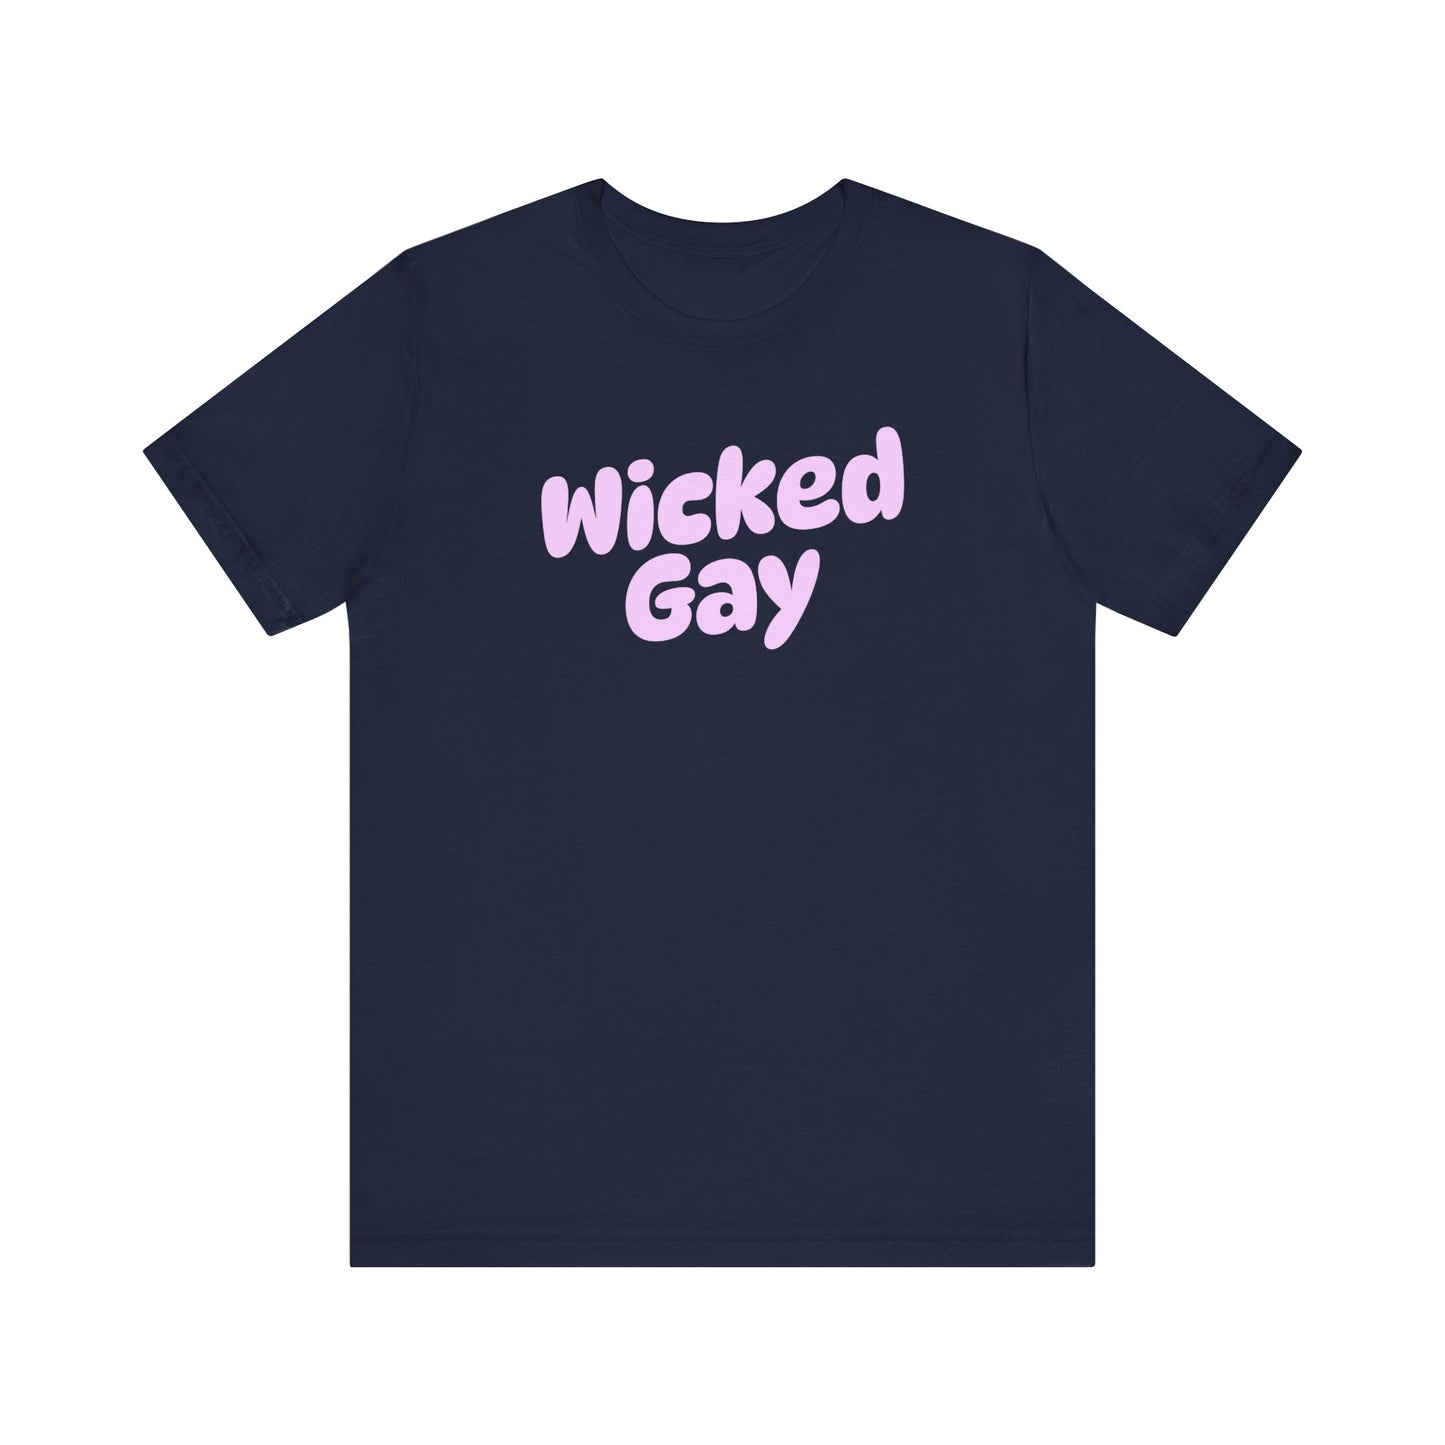 Wicked Gay